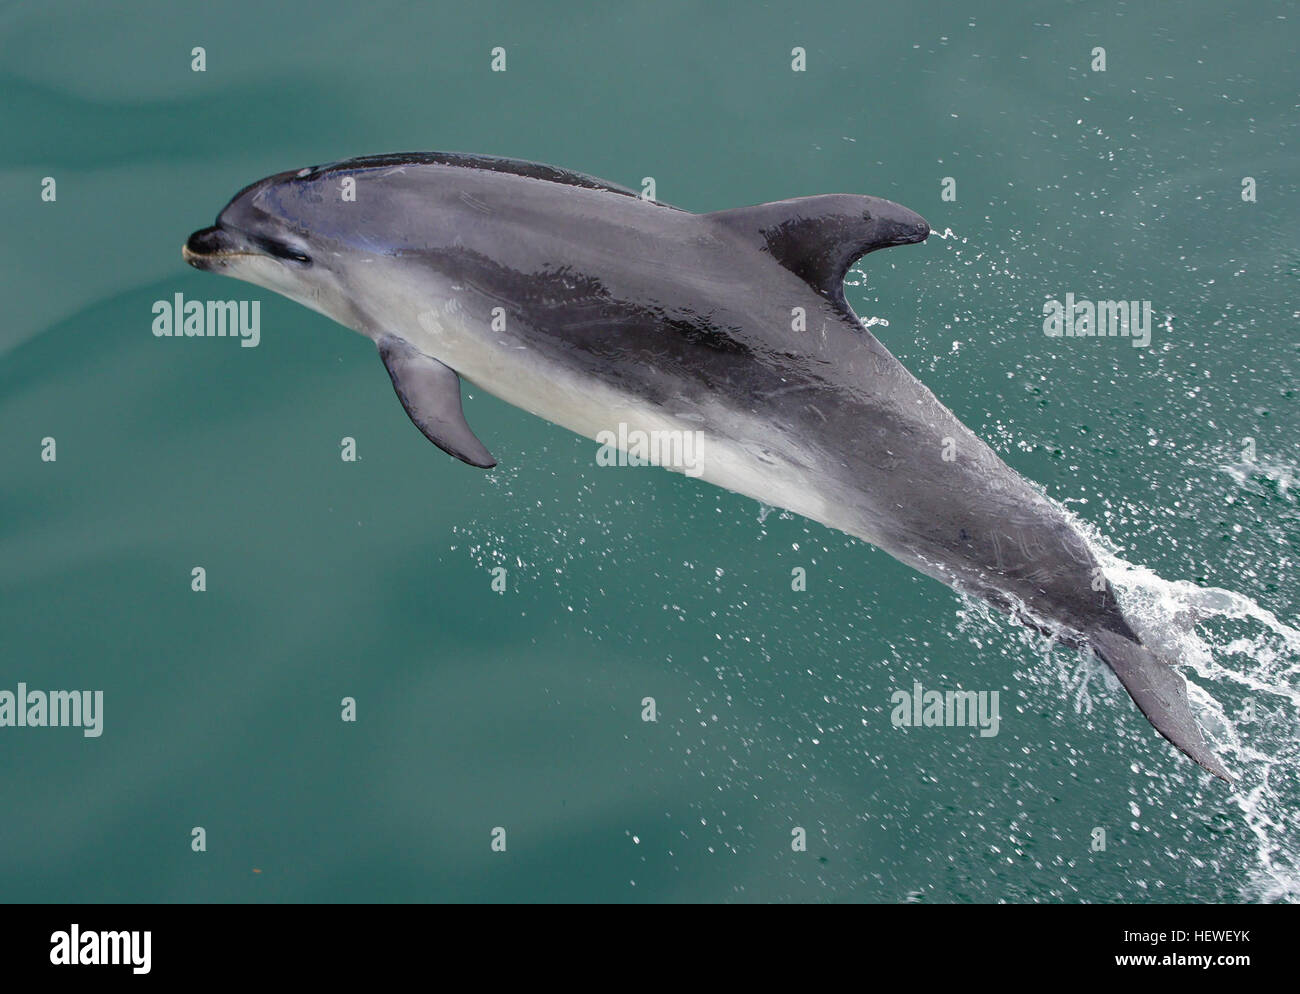 Dusky dolphins (Lagenorhynchus obscurus) are slightly smaller than common dolphins at 1.6–2.1 metres long and 50–90 kilograms in weight. They have tapered diagonal stripes along their side. Their main foods are krill, copepods and small fish. The average size of pods is 6–15, but groupings of several hundred or even thousands are often seen. Stock Photo